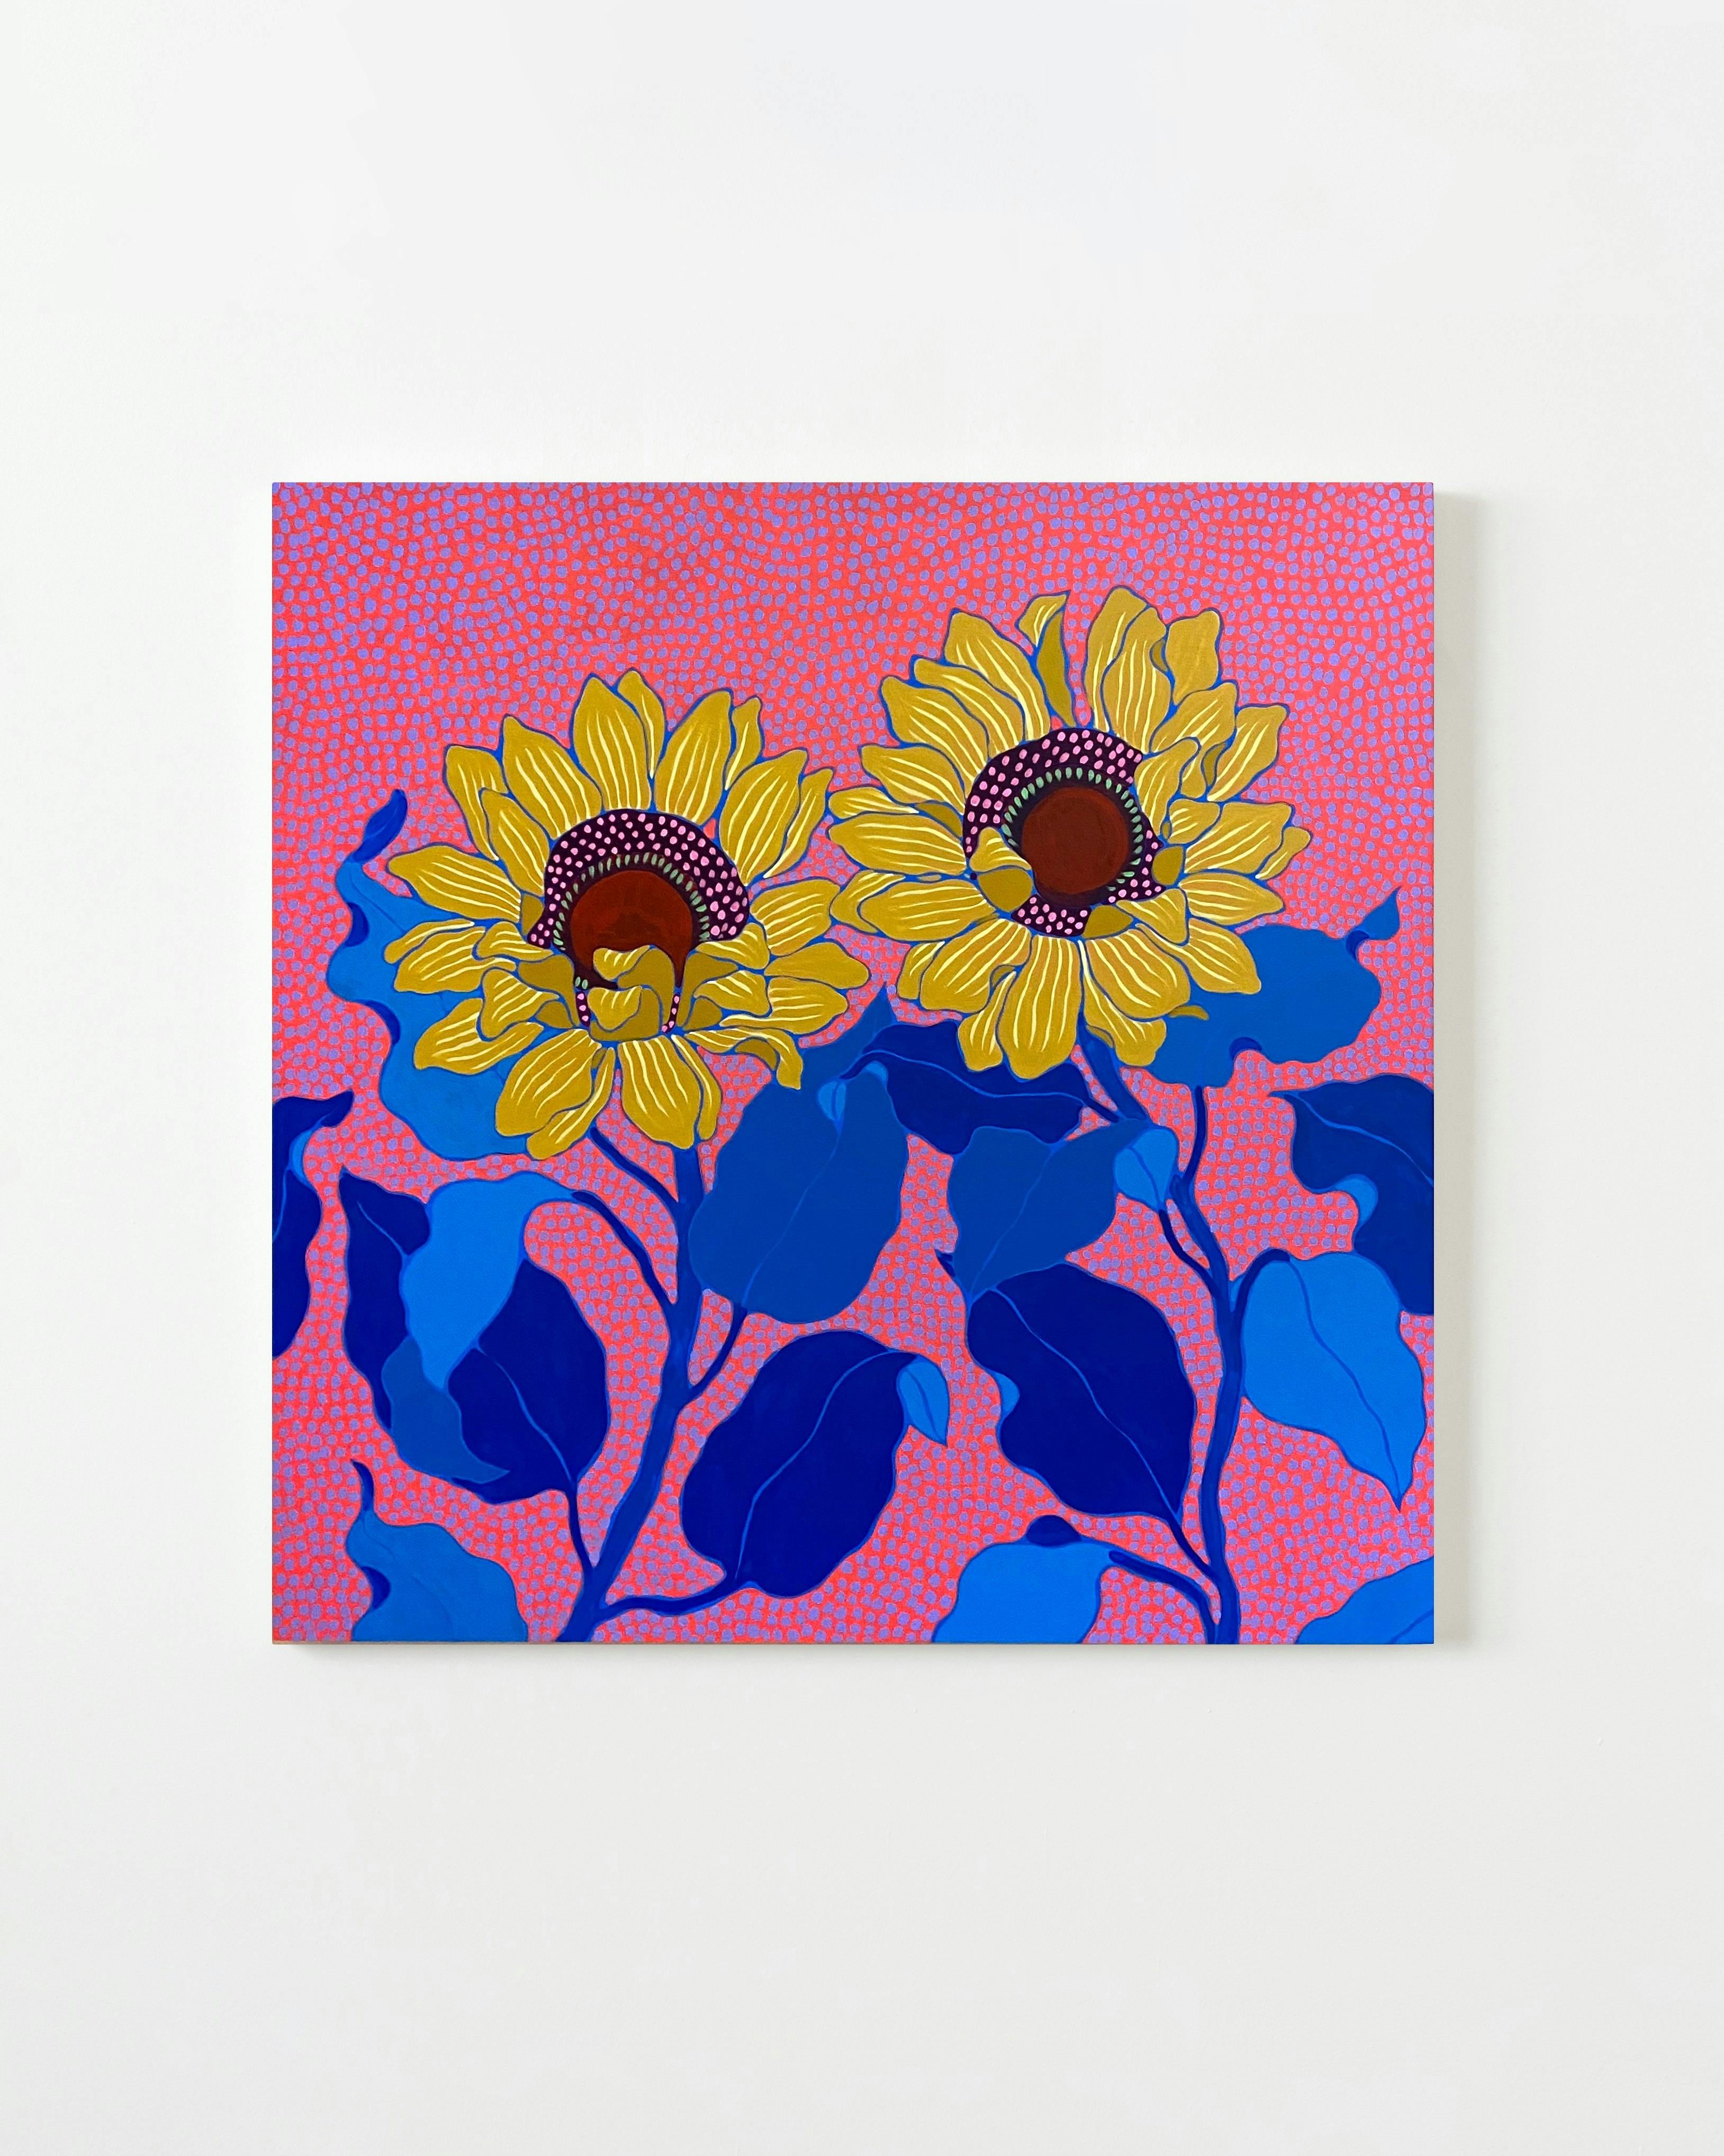 Painting by Sarah Ingraham titled "Two Sunflowers".